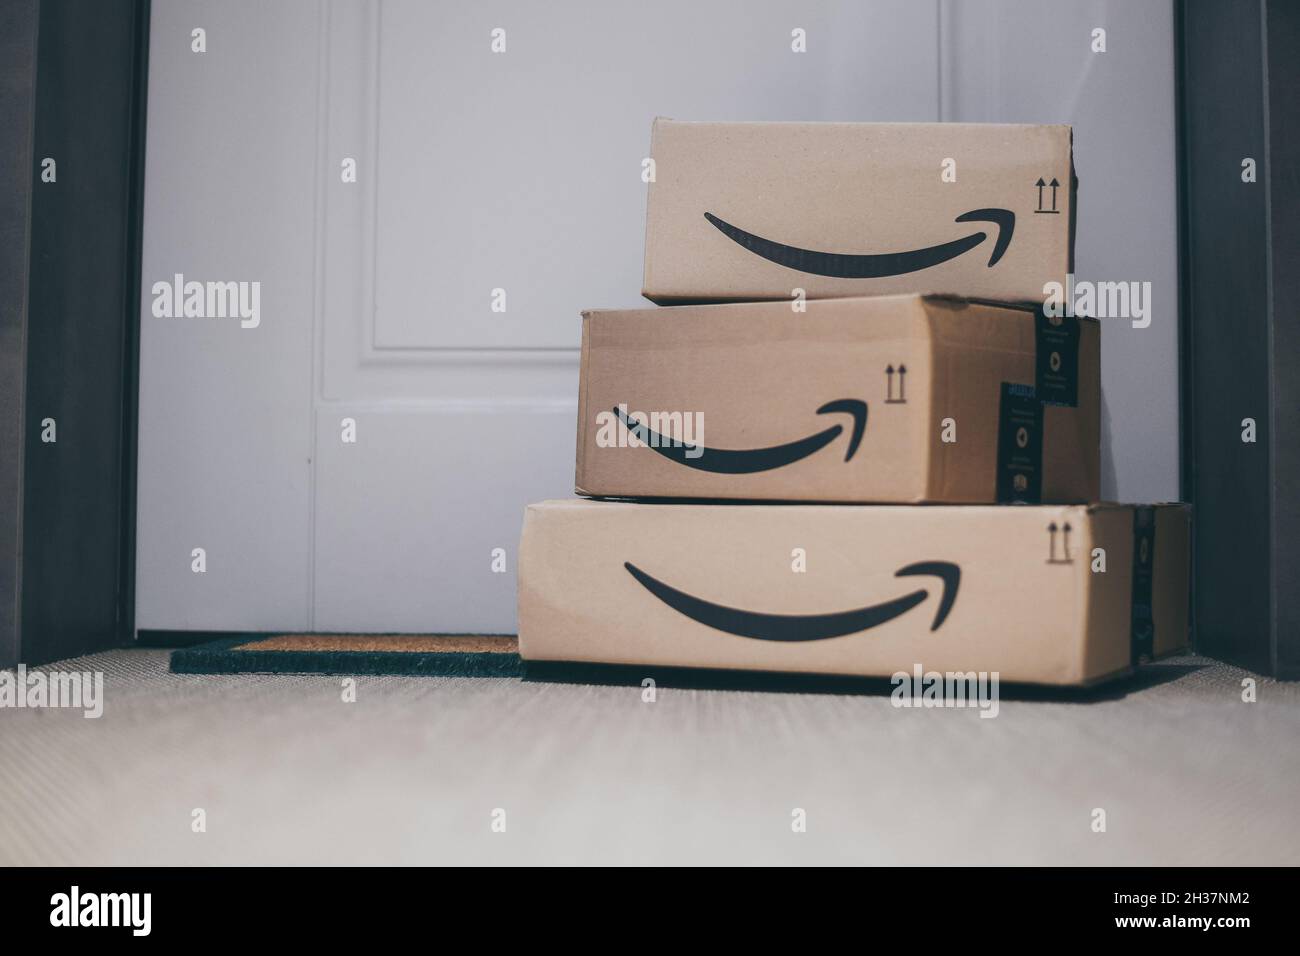 Boxes with Amazon logo in front of the house door. Order on delivery. Christmas gifts in cardboard box on the doormat. Amazon Prime priority delivery. Stock Photo